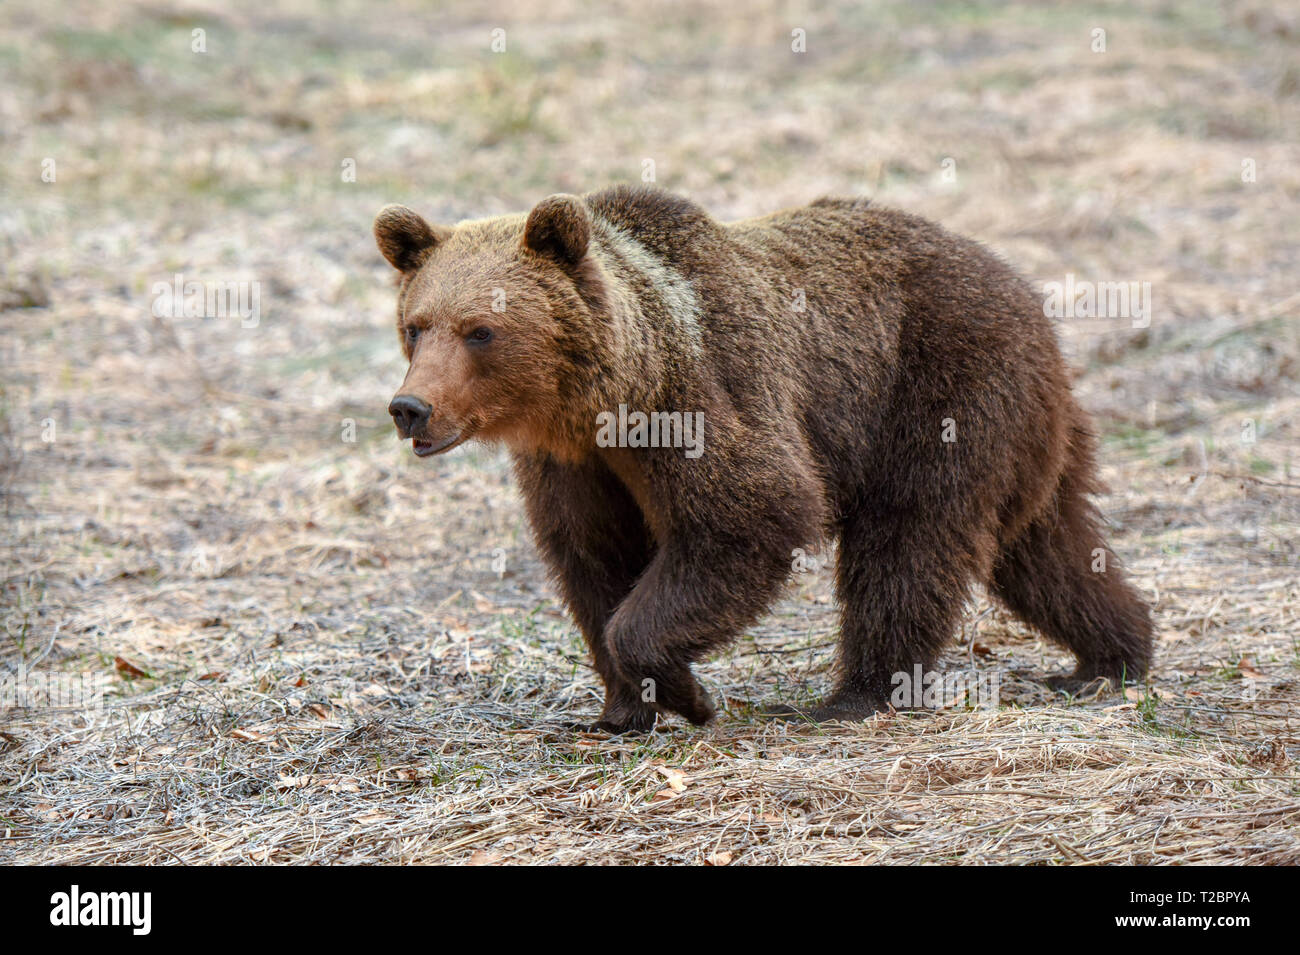 Wild brown bear in Bieszczady mountains, Poland. Huge Carpathian bear woke up from winter hibernation and is looking for food in early spring Stock Photo